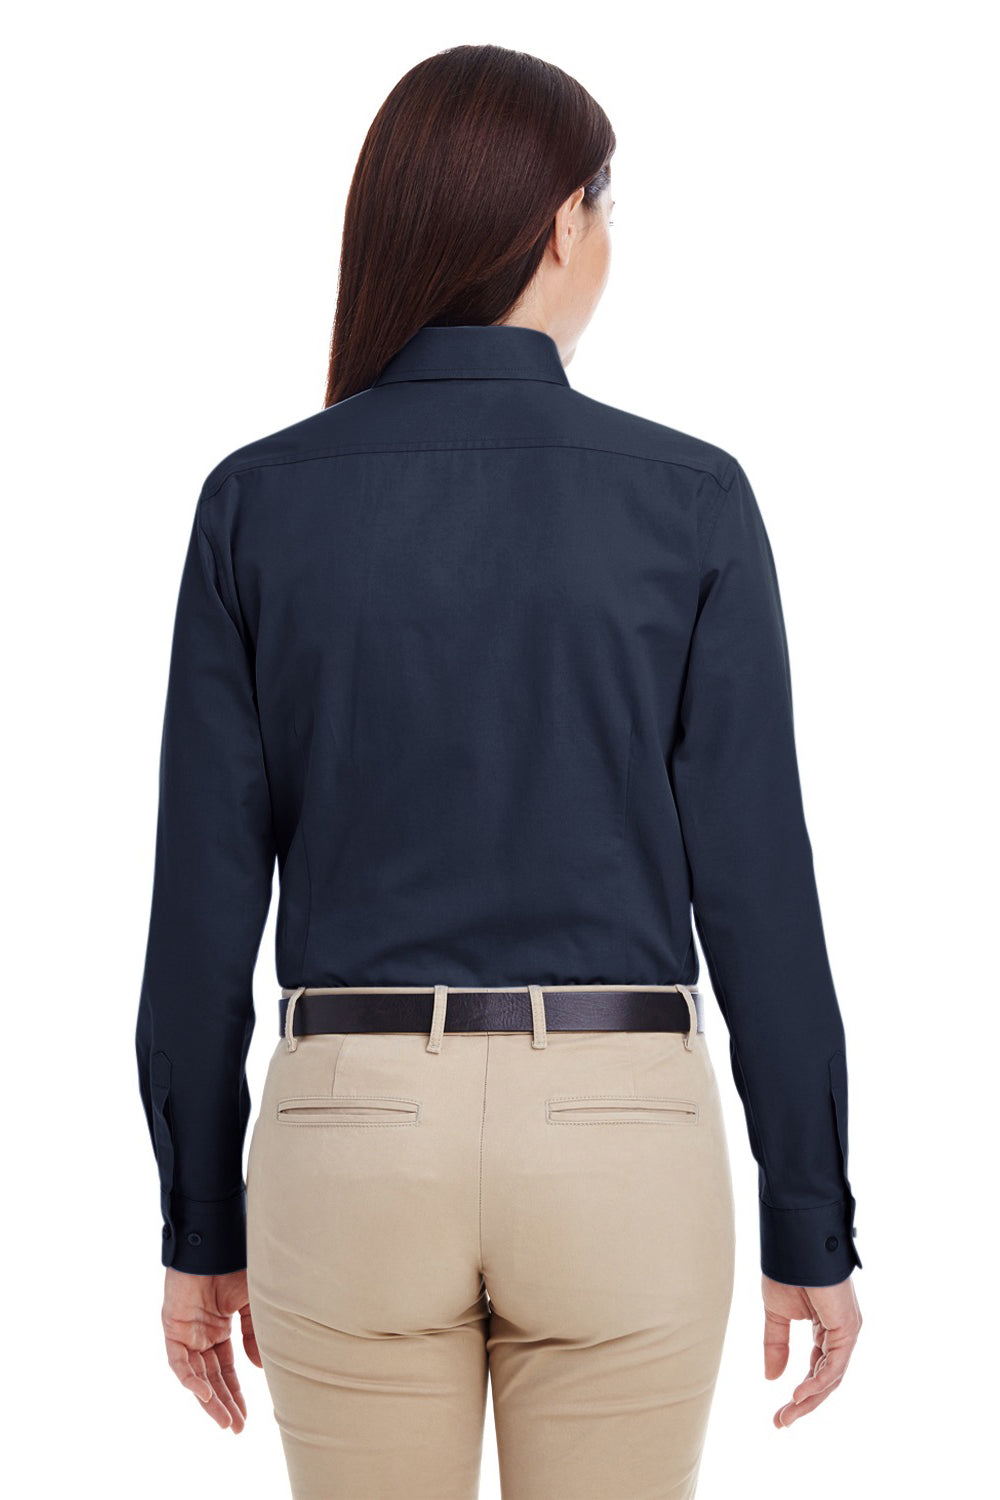 Harriton M581W Womens Foundation Stain Resistant Long Sleeve Button Down Shirt Navy Blue Back